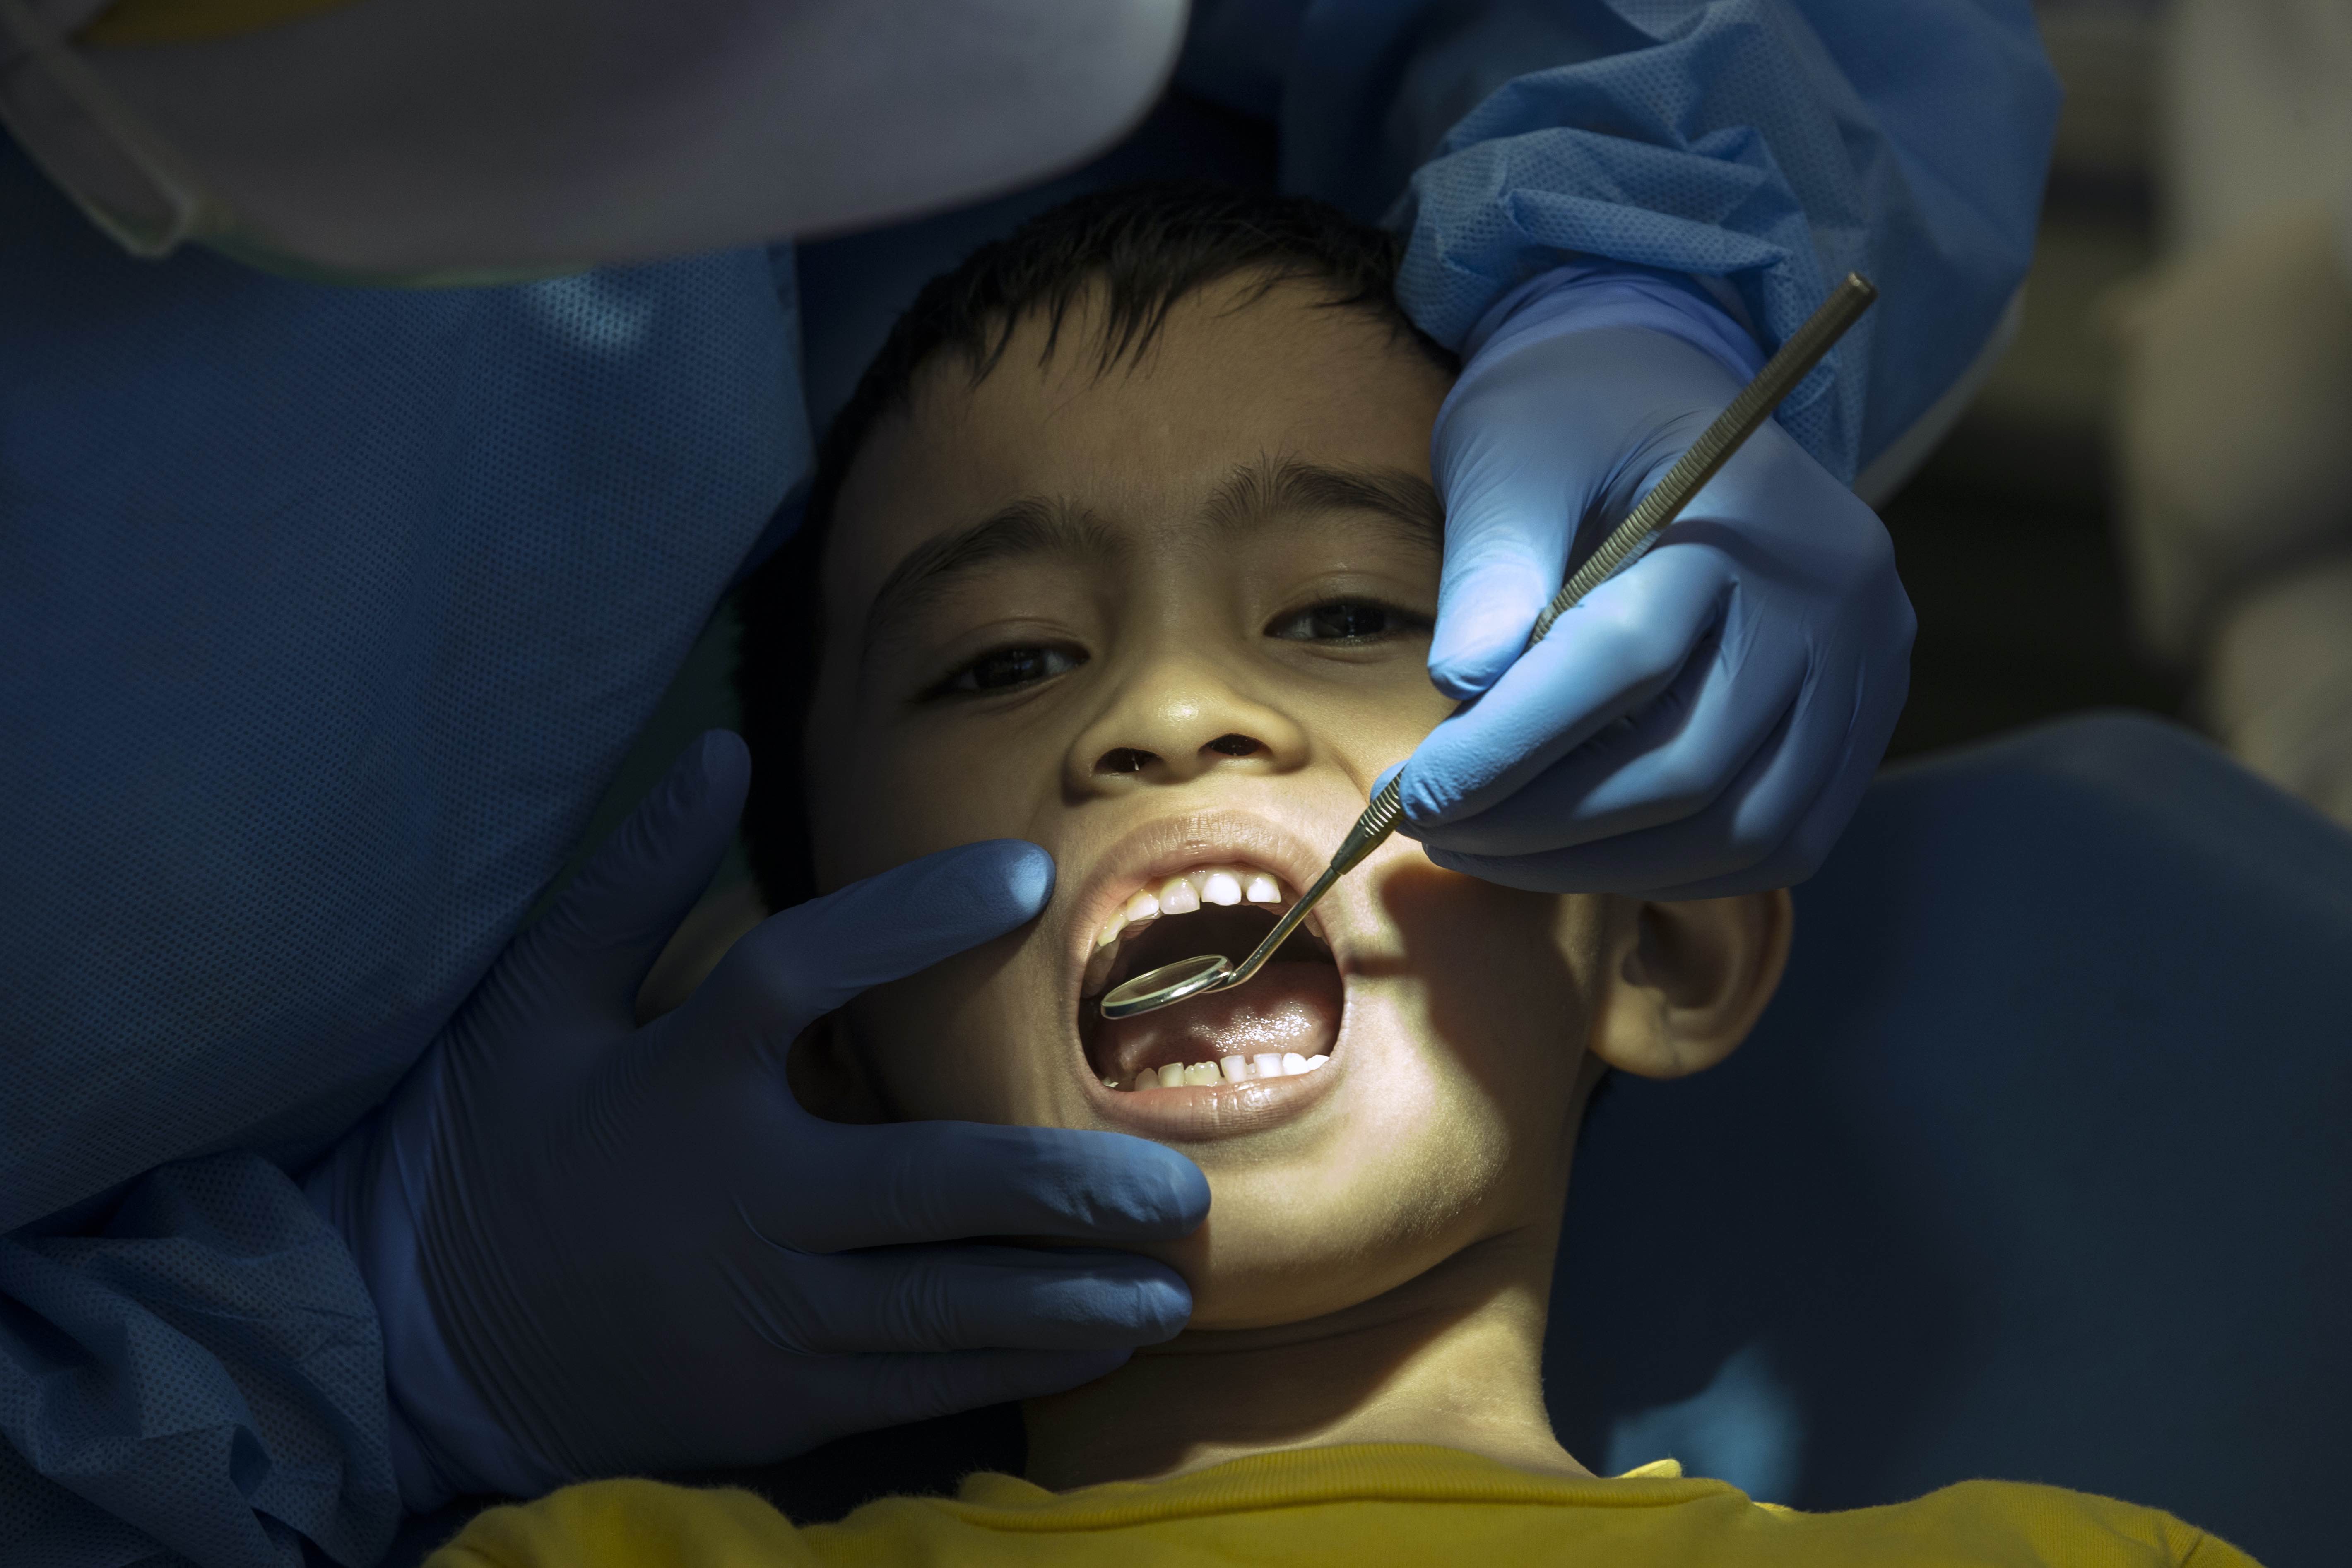 Considerations for the provision of essential oral health services in the context of COVID-19